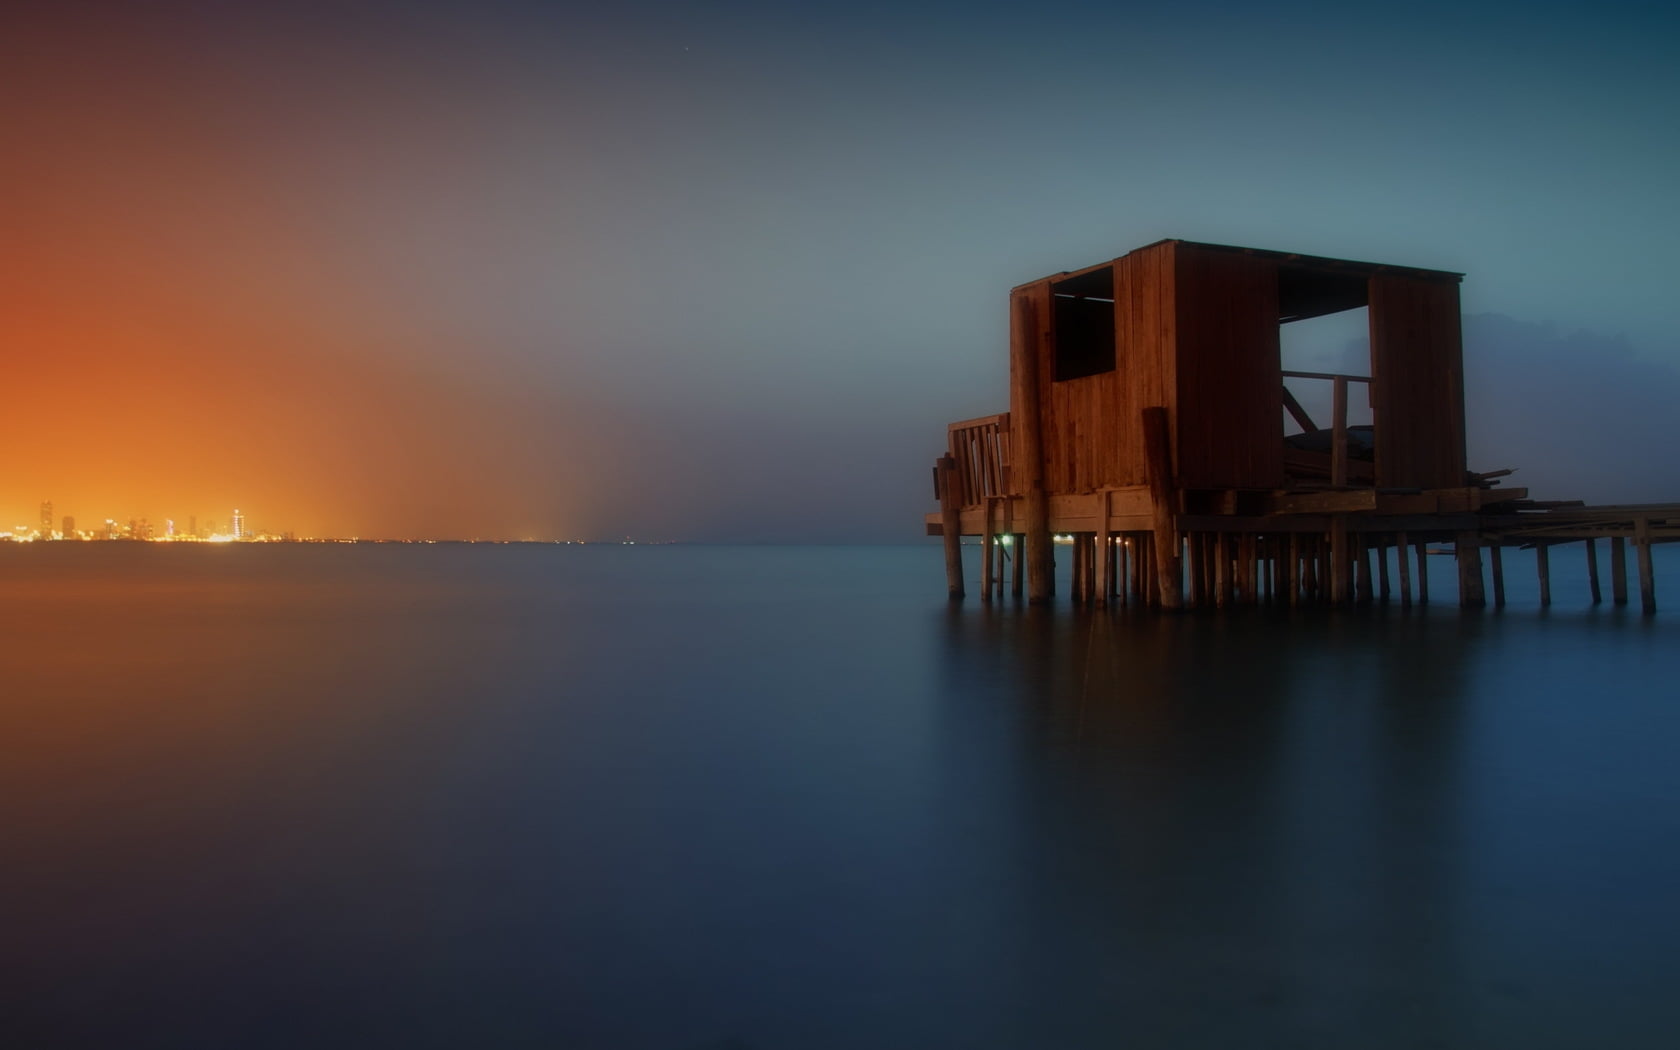 landscape photo of brown wooden shed on sea dock